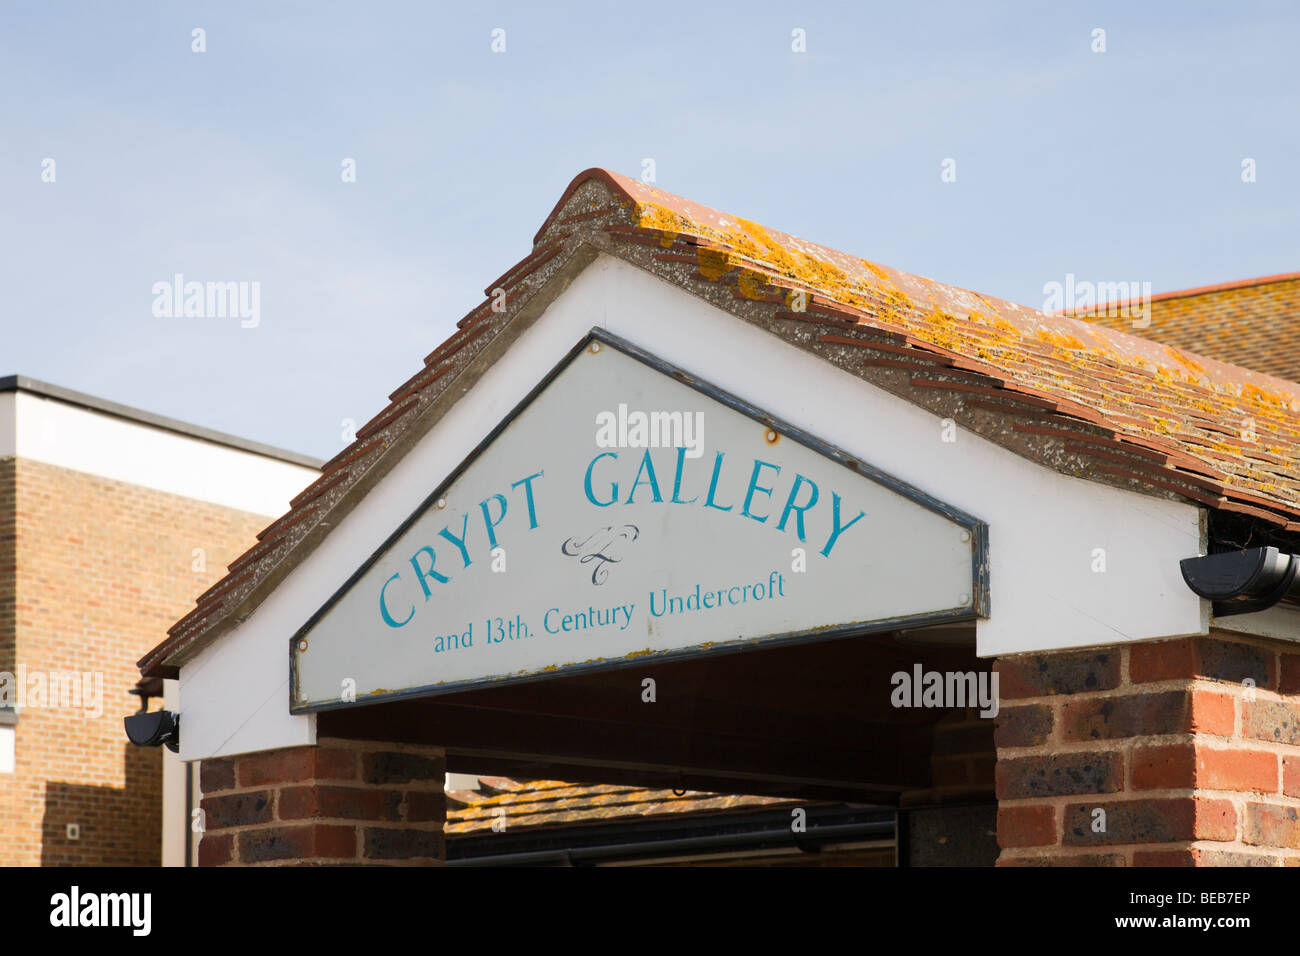 Entrance to the Crypt Gallery, Seaford, Sussex, England, UK. Stock Photo